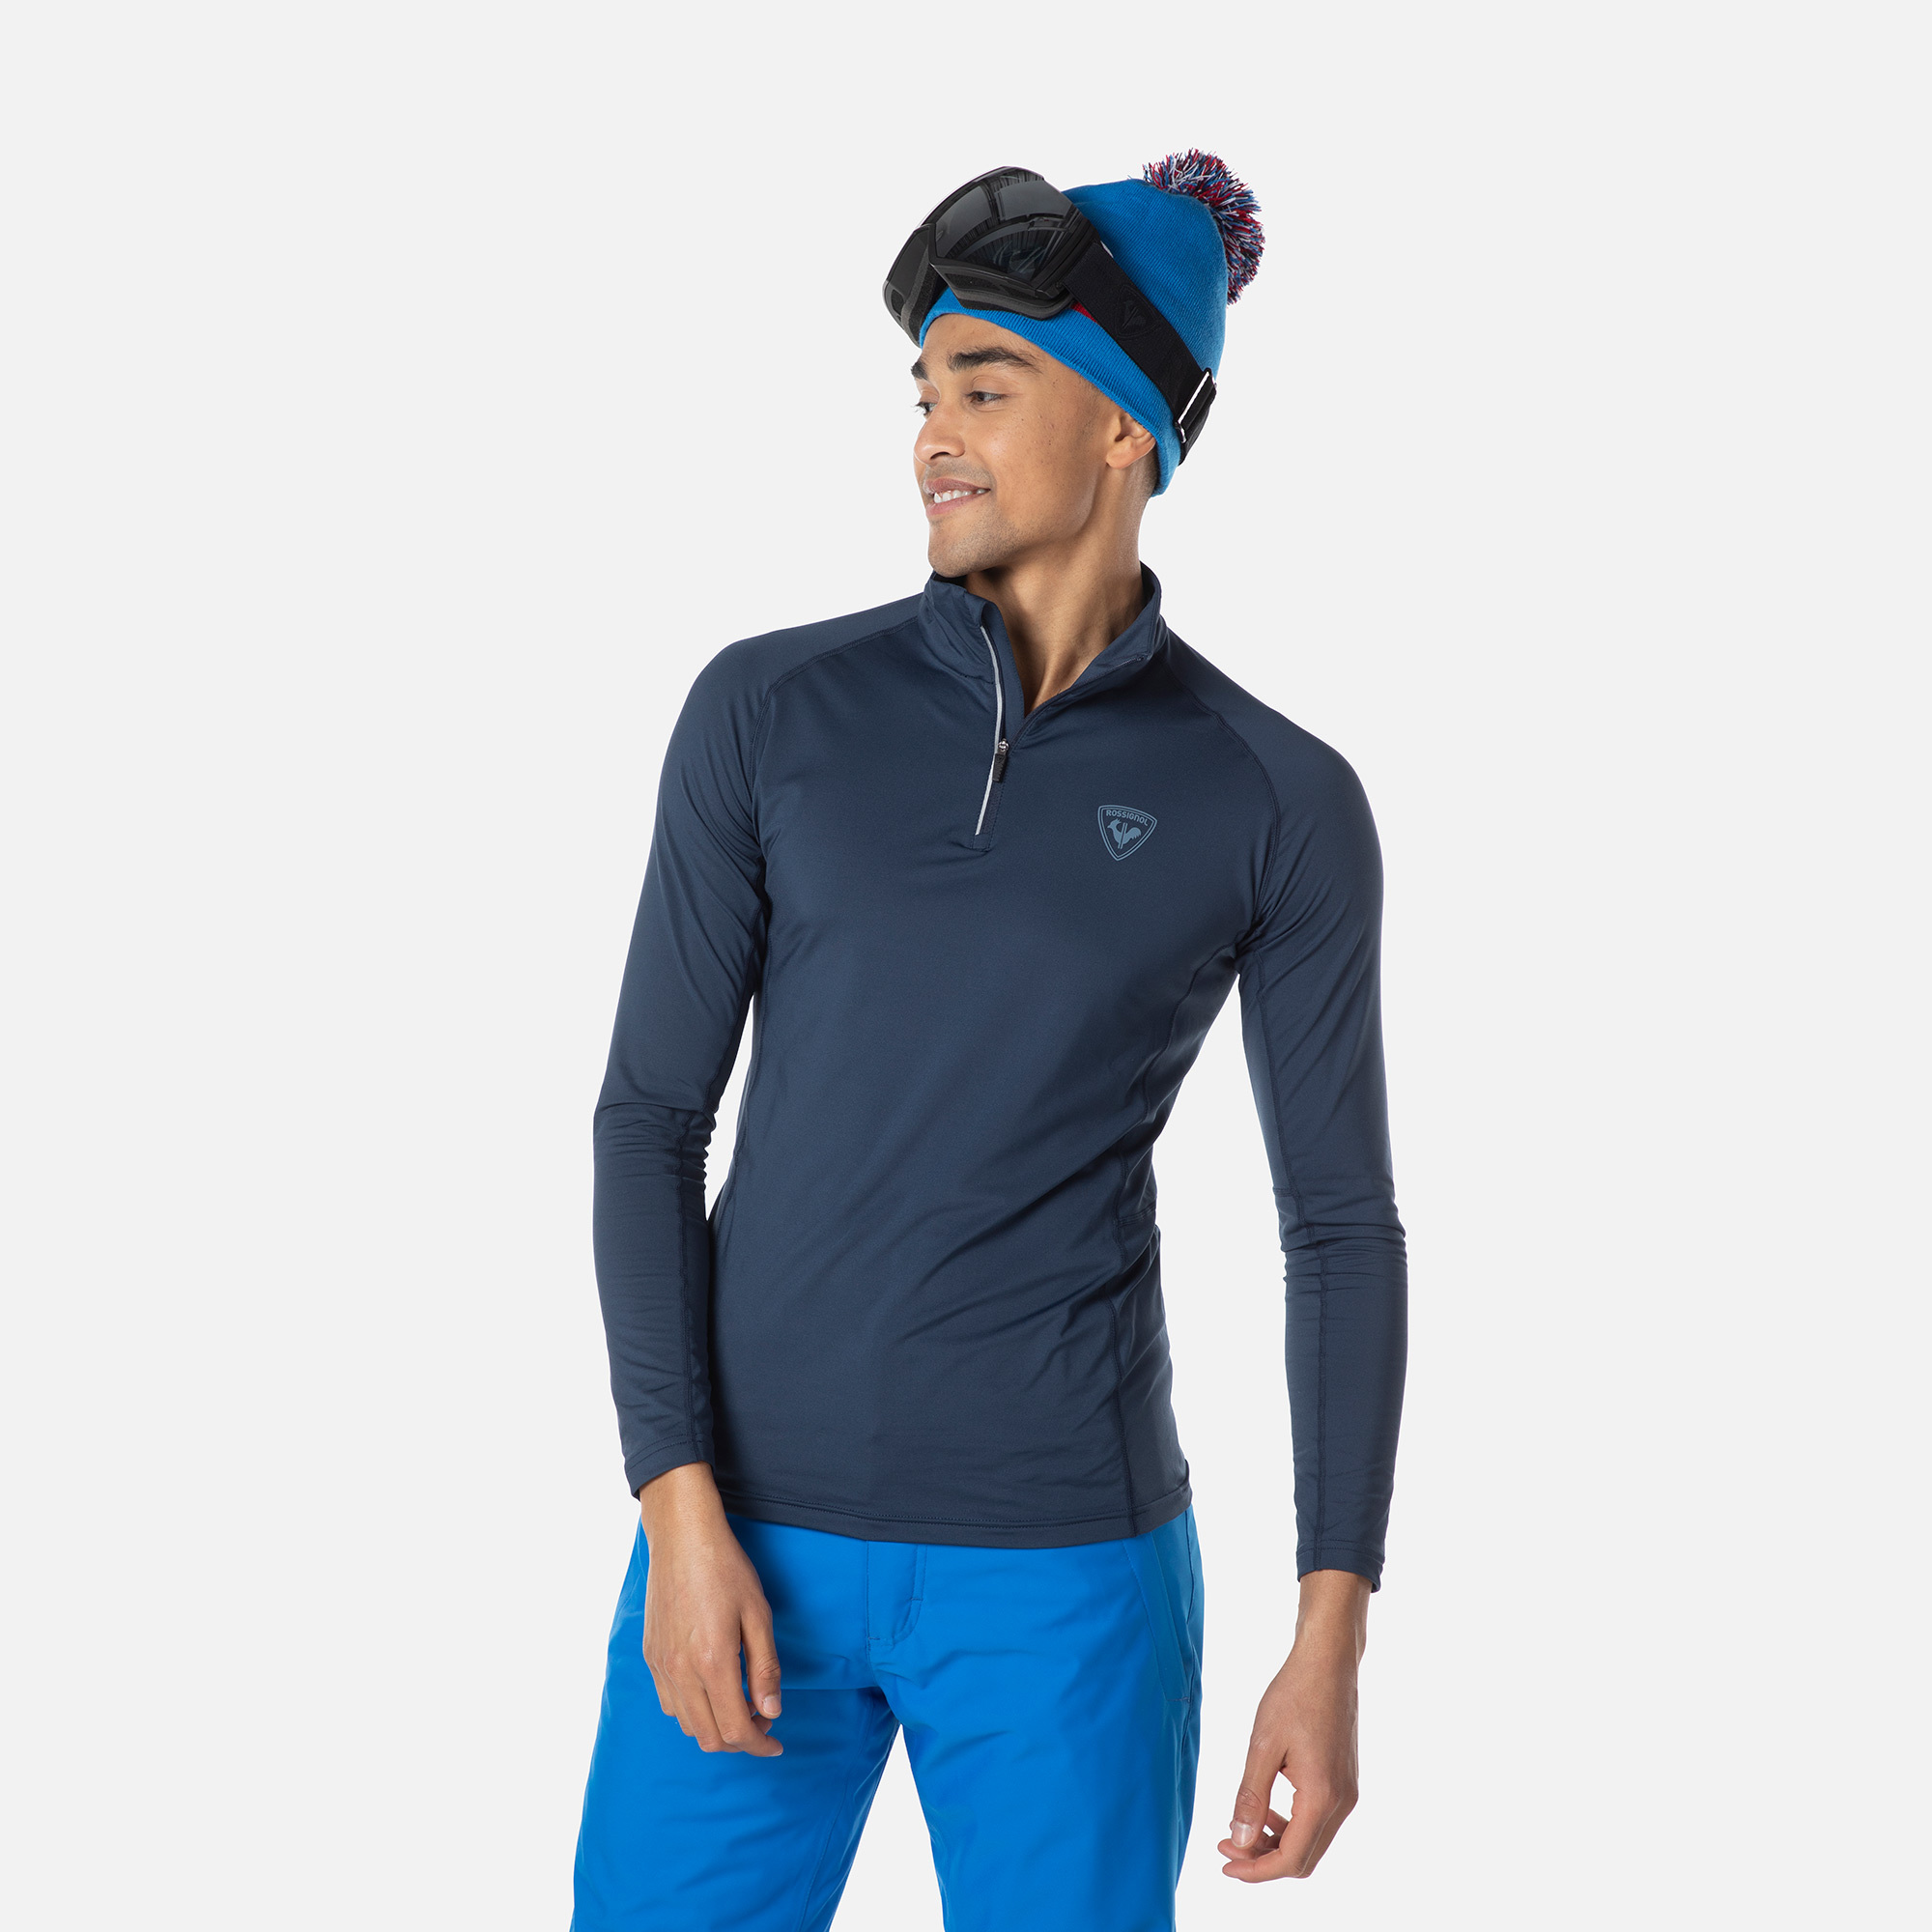 Rossignol Infini Compression Race Top Onyx Grey Base layer/thermal tops :  Snowleader